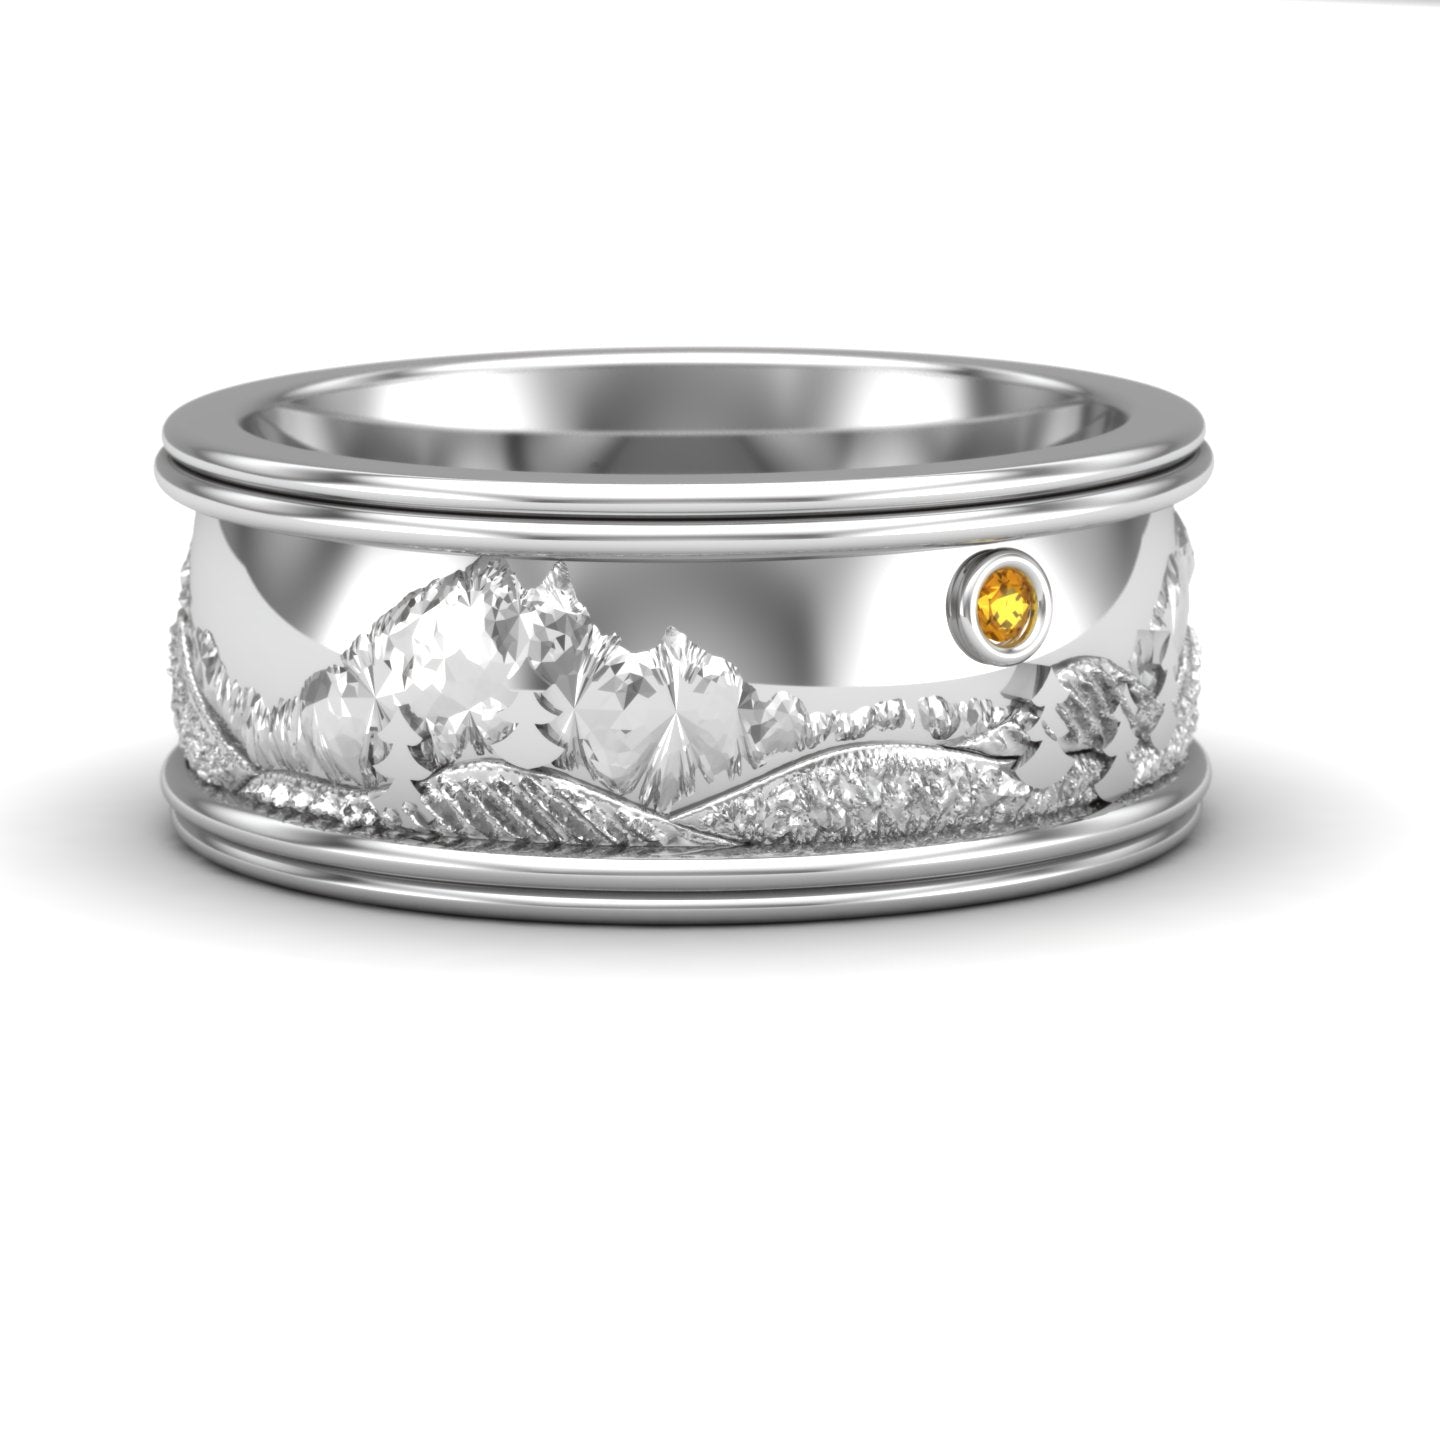 rocky mountain wedding band yellow sapphire in sterling silver - Charles Babb Designs